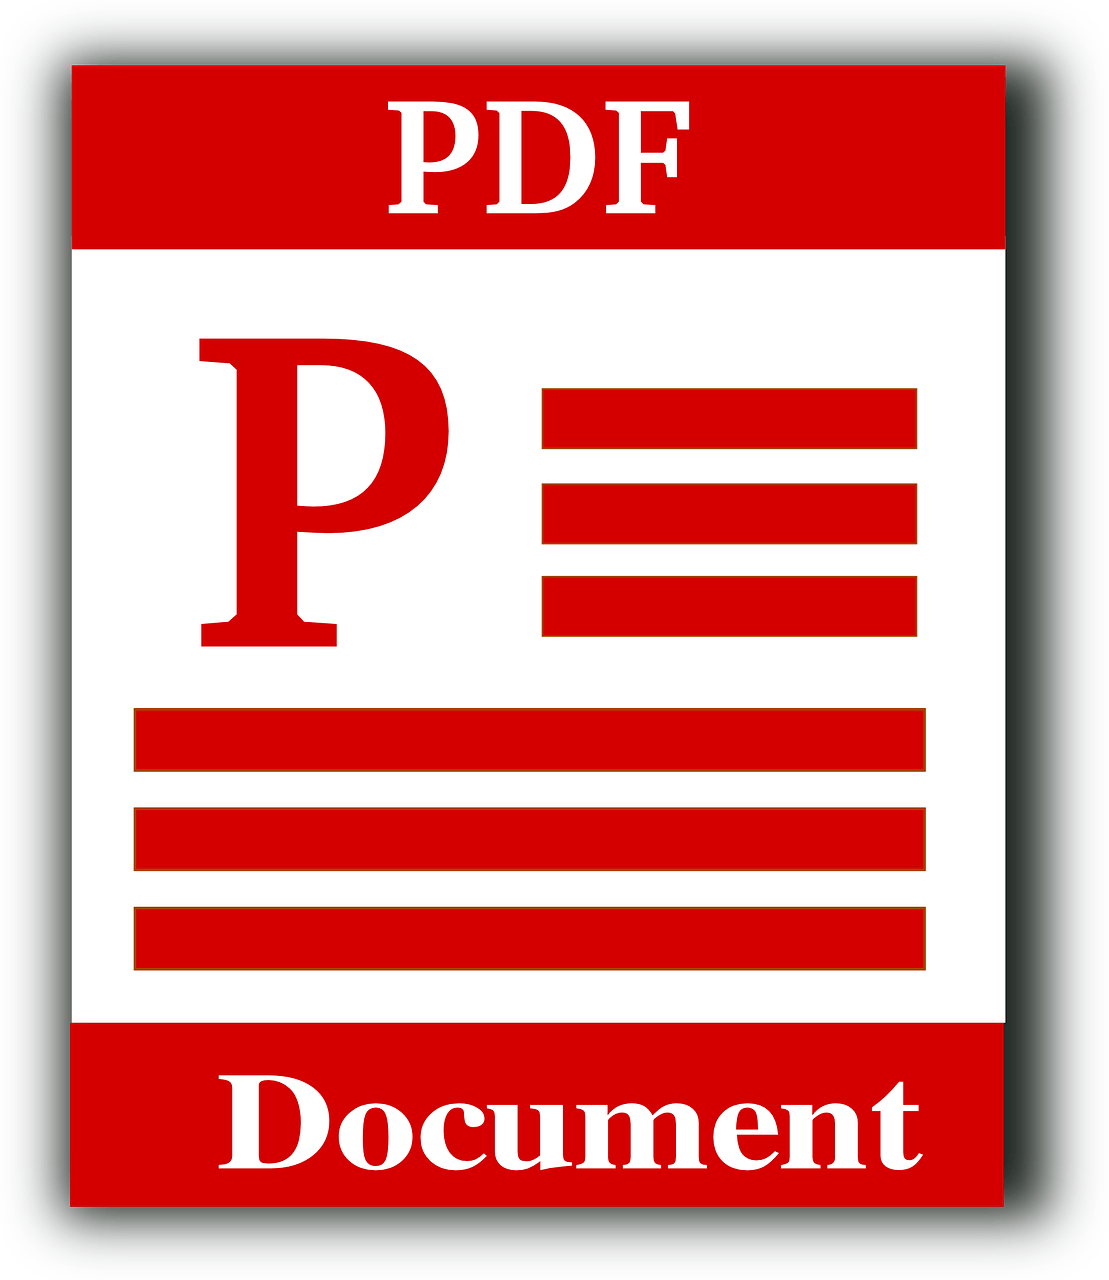 Document Conversion: A Useful Feature In PDFBear